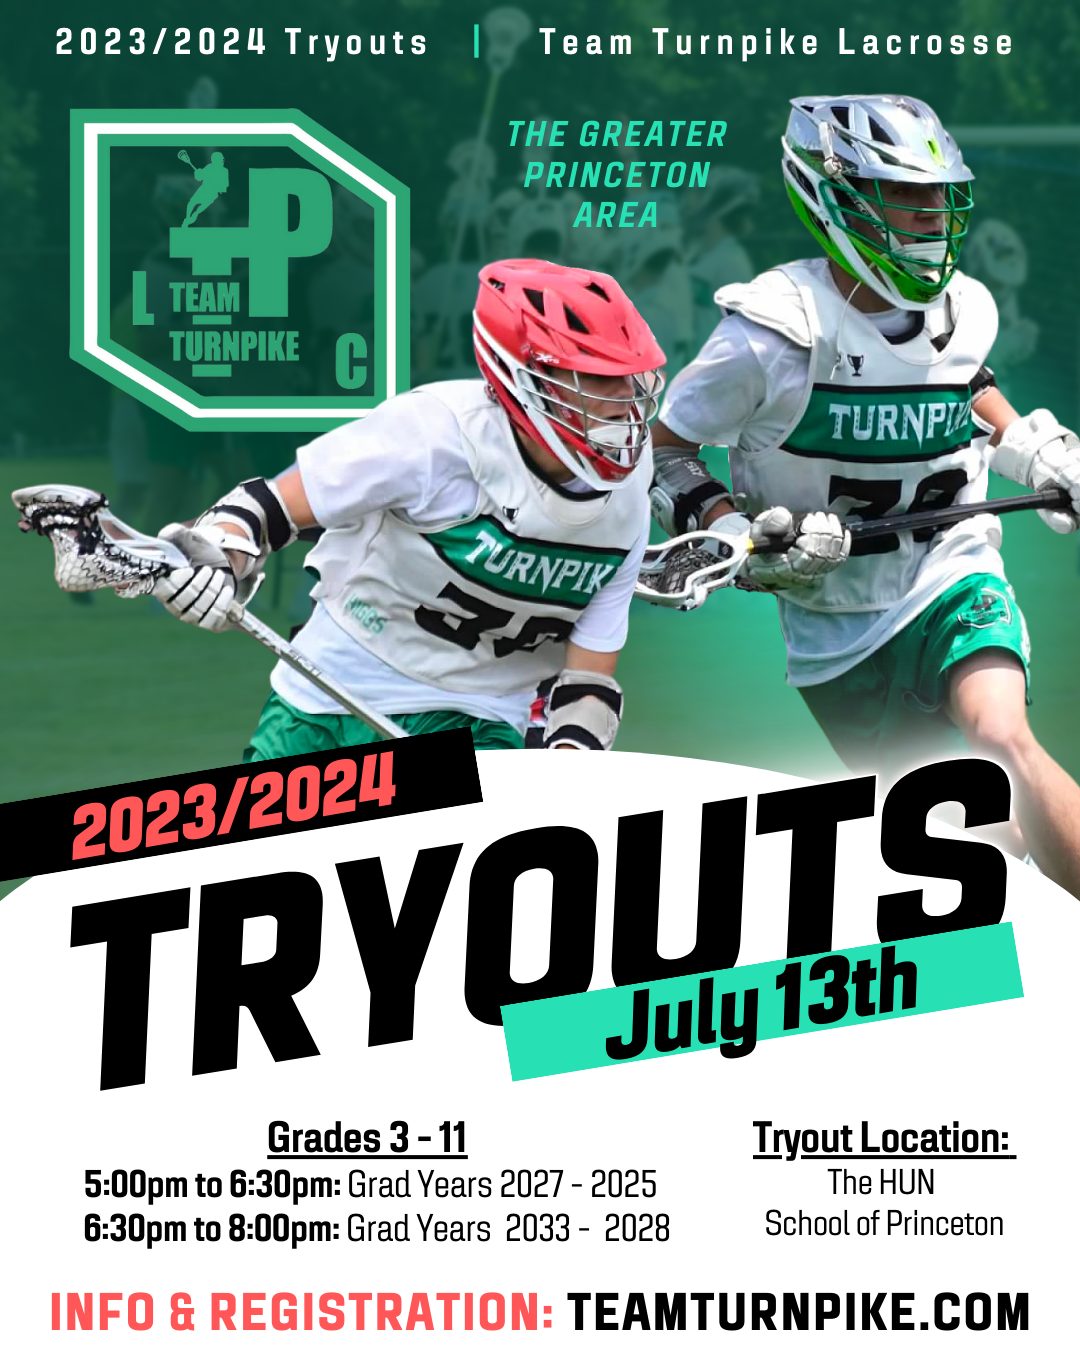 2023/2024 Tryouts